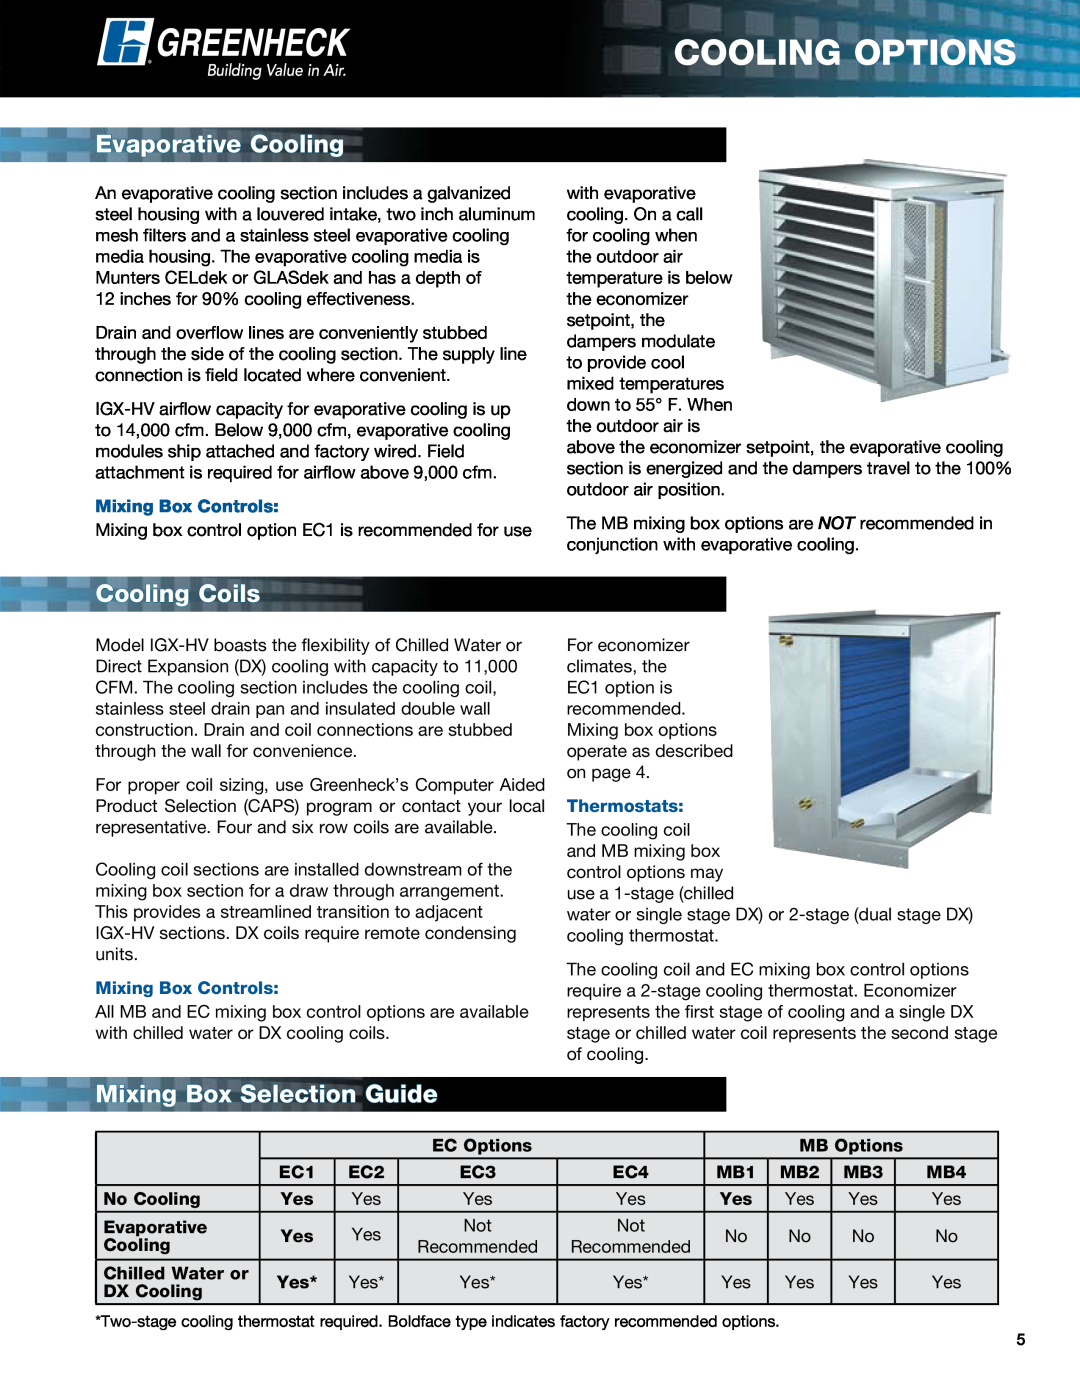 Greenheck Fan IGX-HV Cooling options, Evaporative Cooling, Cooling Coils, Mixing Box Selection Guide, Mixing Box Controls 